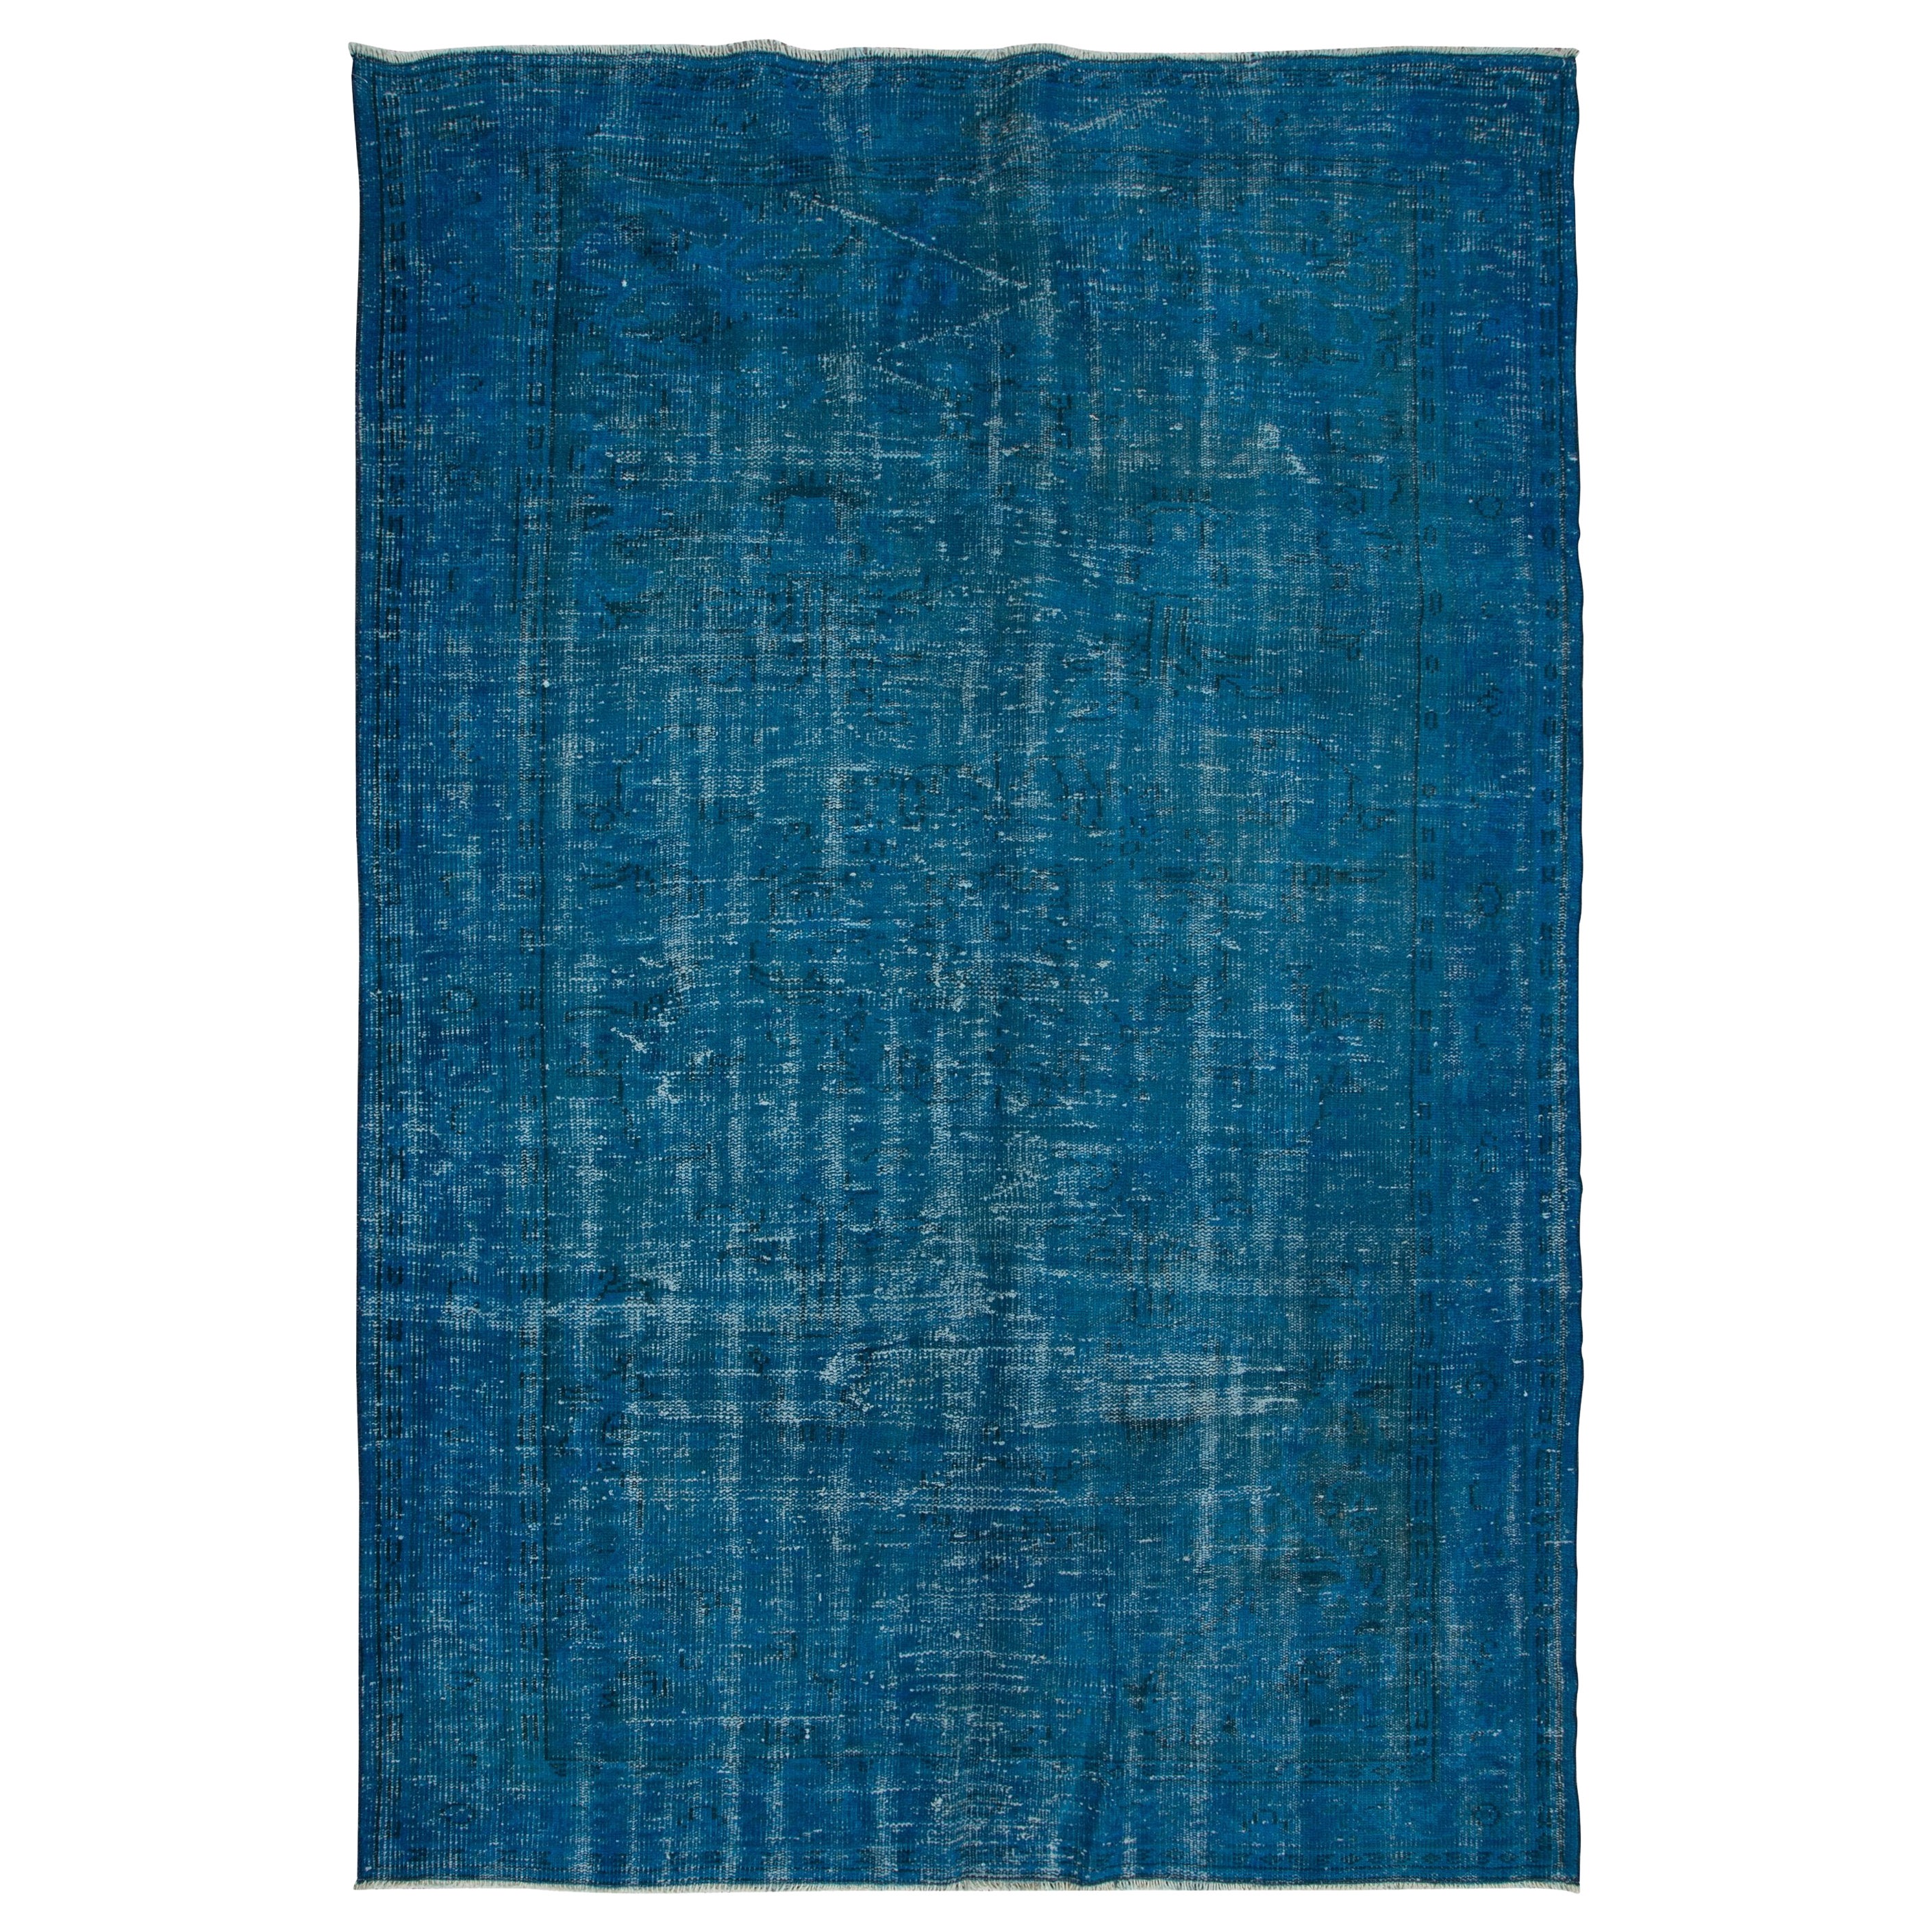 5.8x8.6 Ft Overdyed Blue Area Rug, Handmade in Turkey, Modern Upcycled Carpet (tapis moderne recyclé)